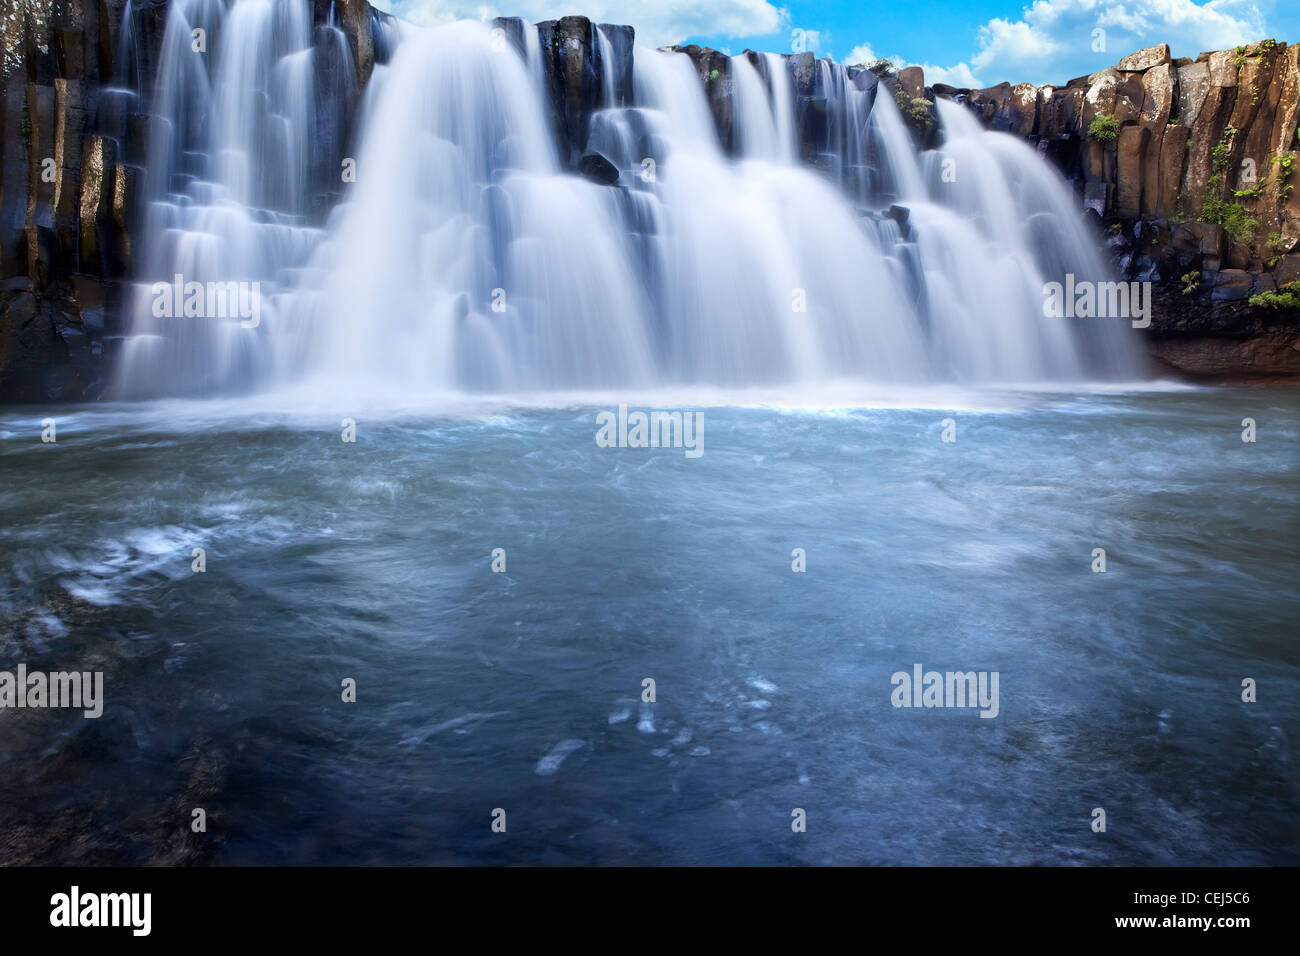 Beautiful waterfall with clear blue sky in background Stock Photo